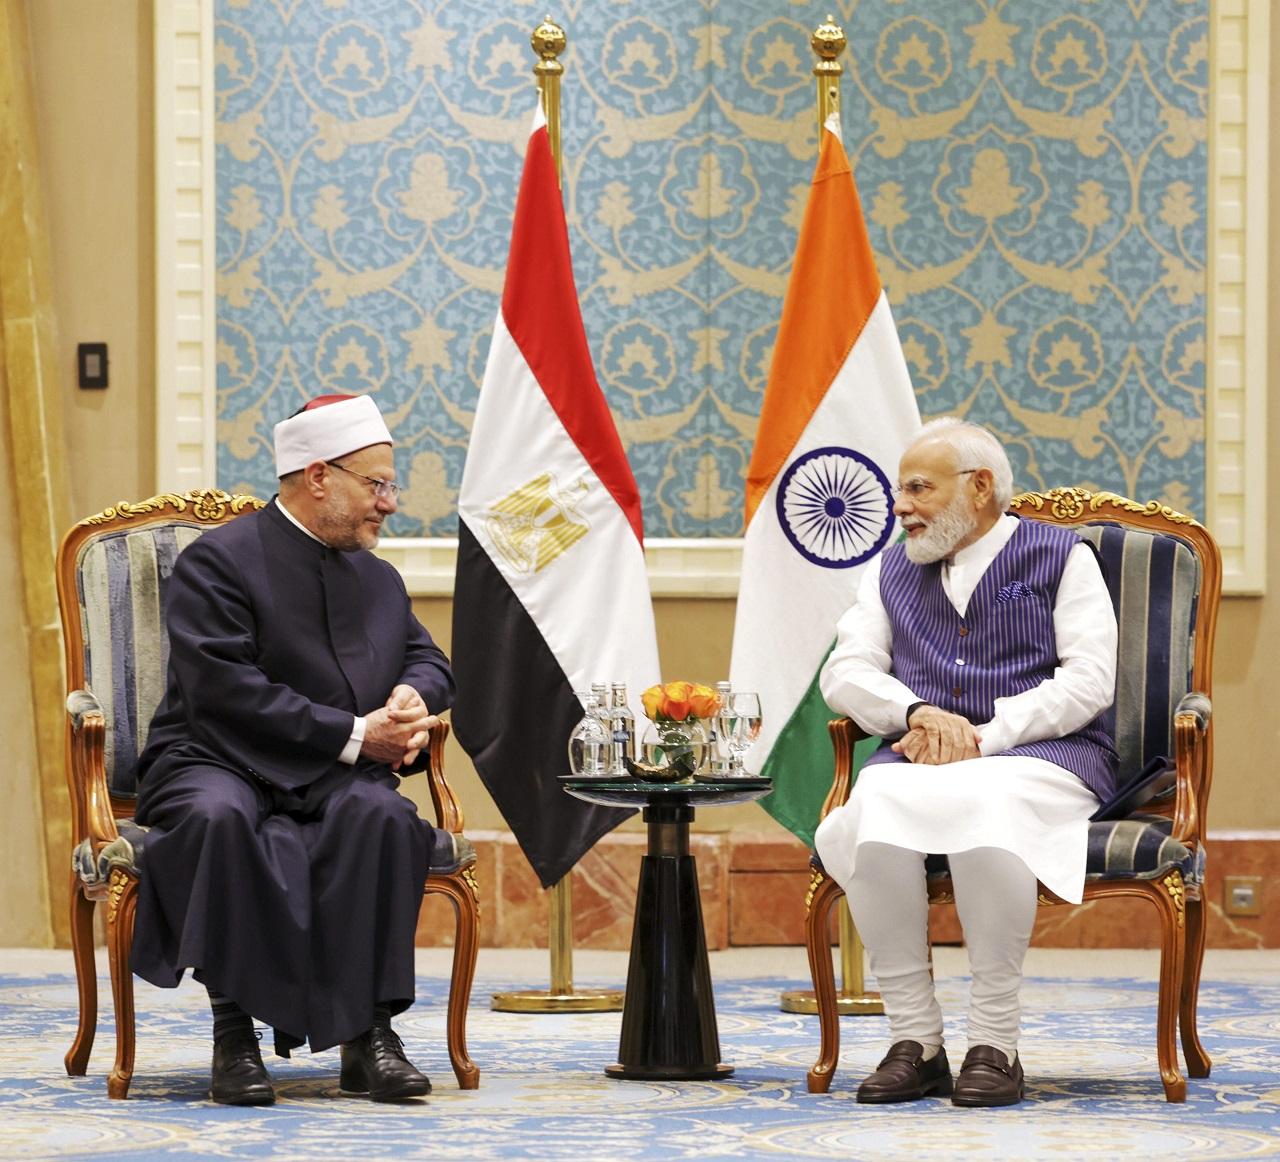 PM Modi began his visit with discussions with Egyptian Prime Minister Madbouly and top Cabinet ministers to deepen trade relations and further strengthen the strategic partnership (Pic/PTI)